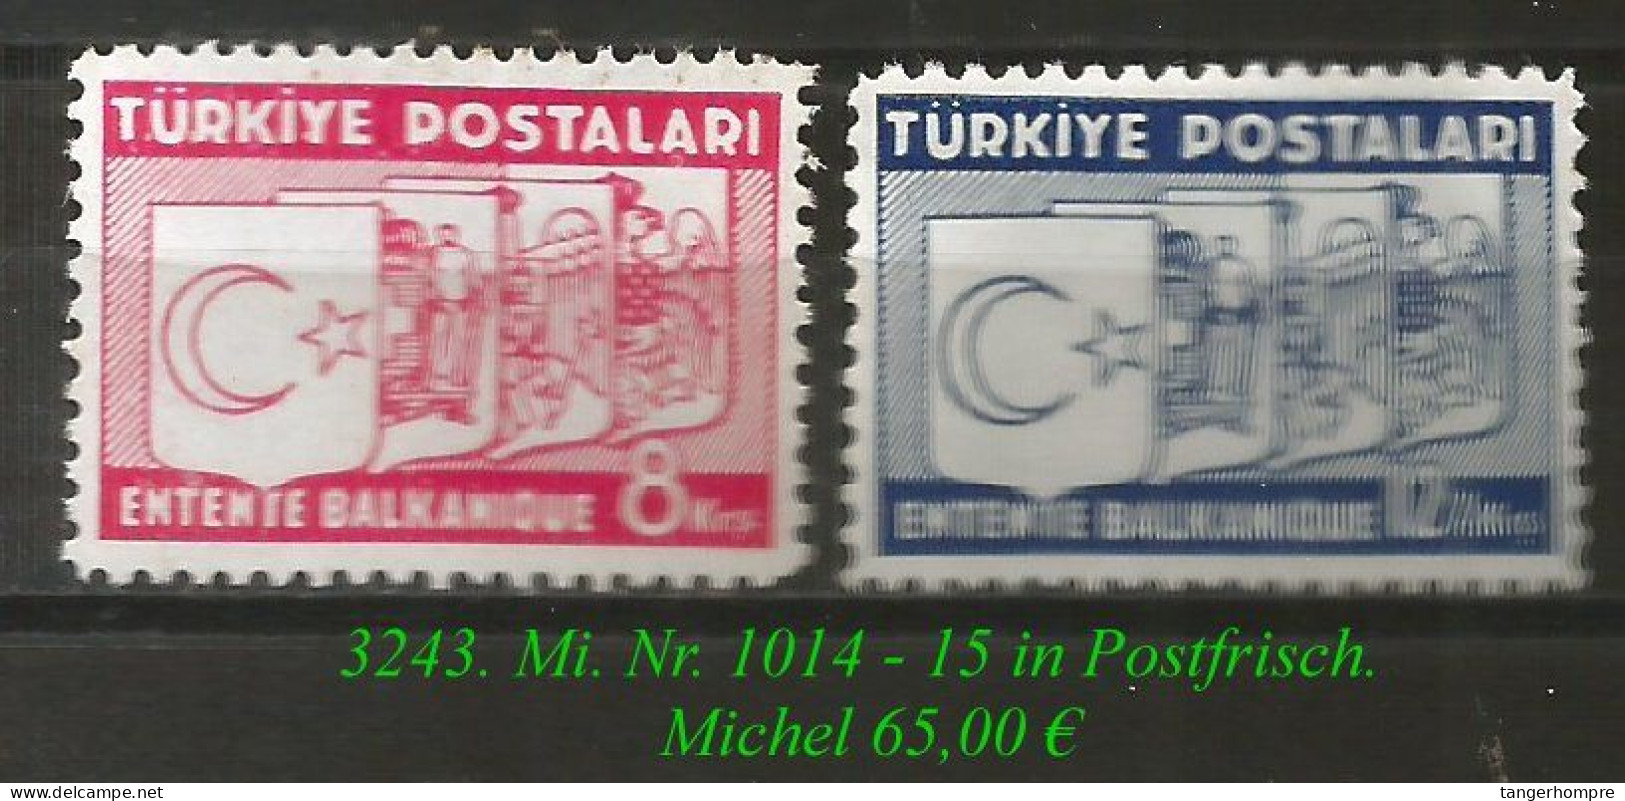 TURKEY ,EARLY OTTOMAN SPECIALIZED FOR SPECIALIST, SEE.... Mi. Nr. 1014 - 15 C In Postfrisch - Nuovi